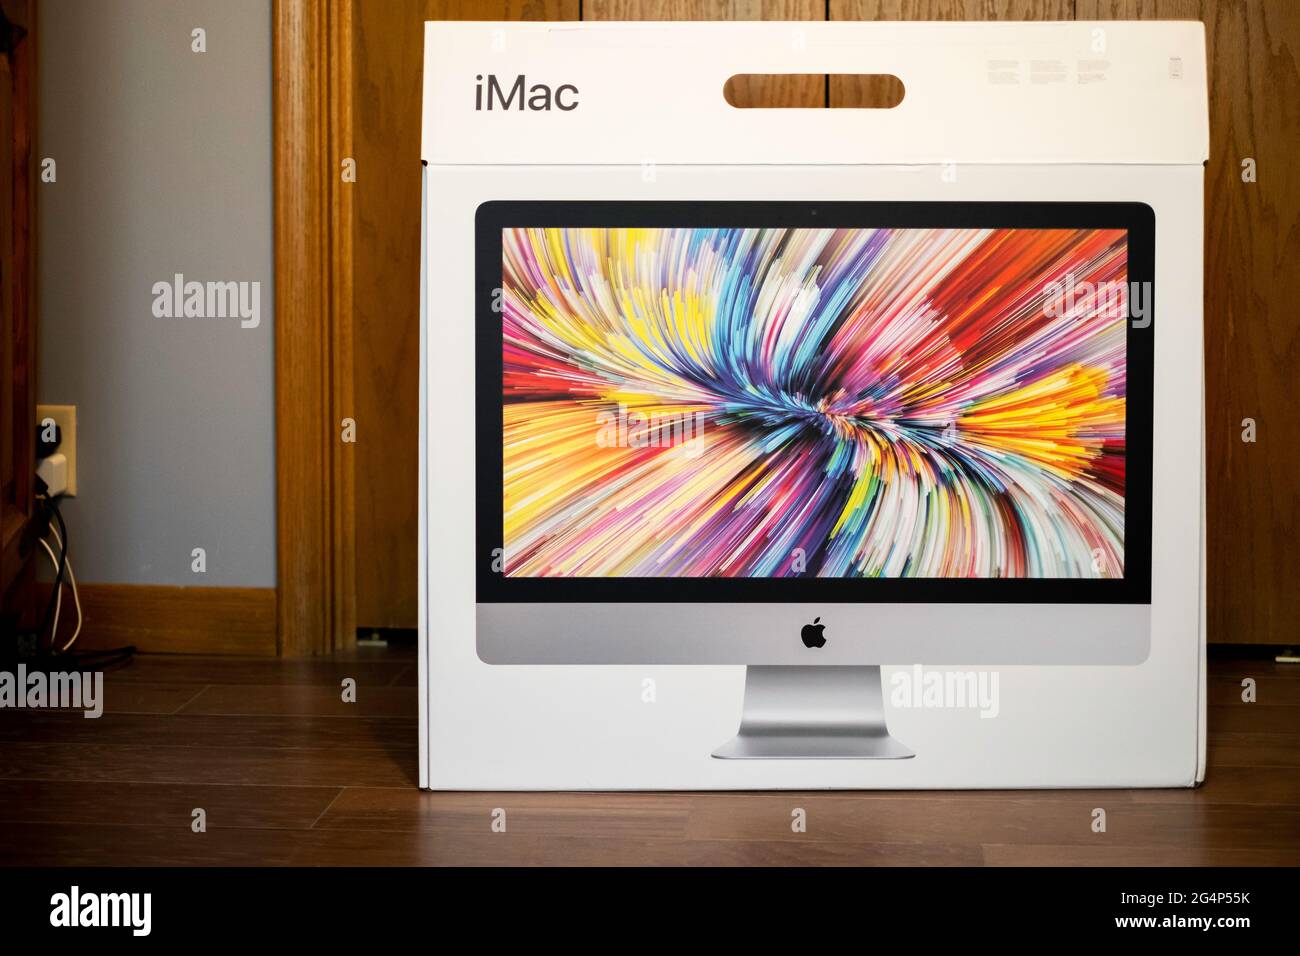 New 2020 model iMac box sitting on the floor after delivery. Stock Photo